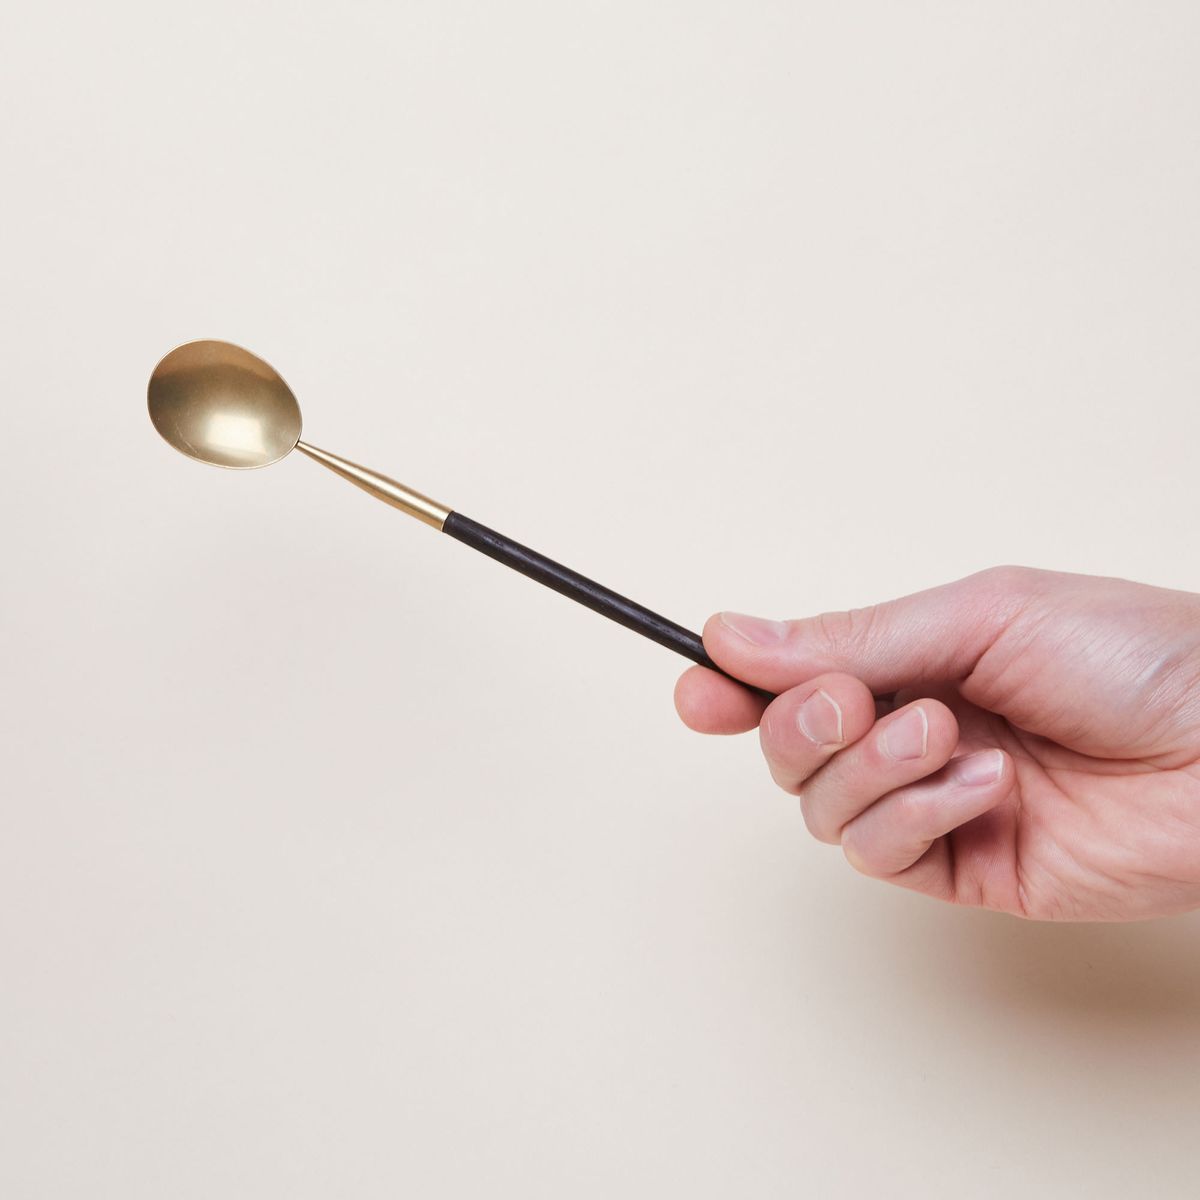 A hand holds a long spoon that has a thin, dark handle attached by a brass ferrule and bowl